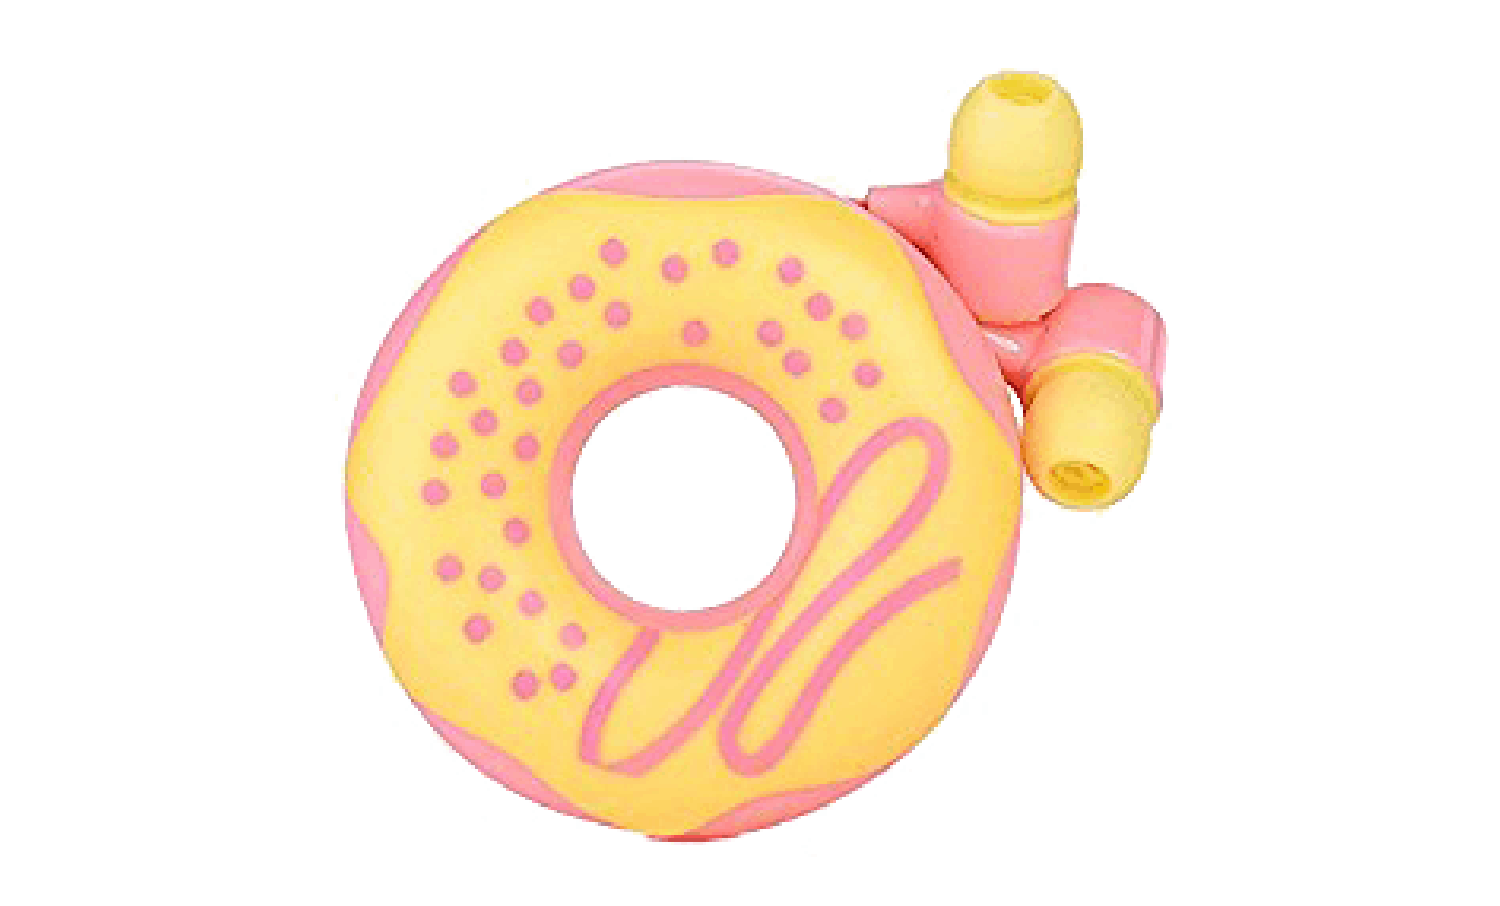 A pair of Donut shaped headphones